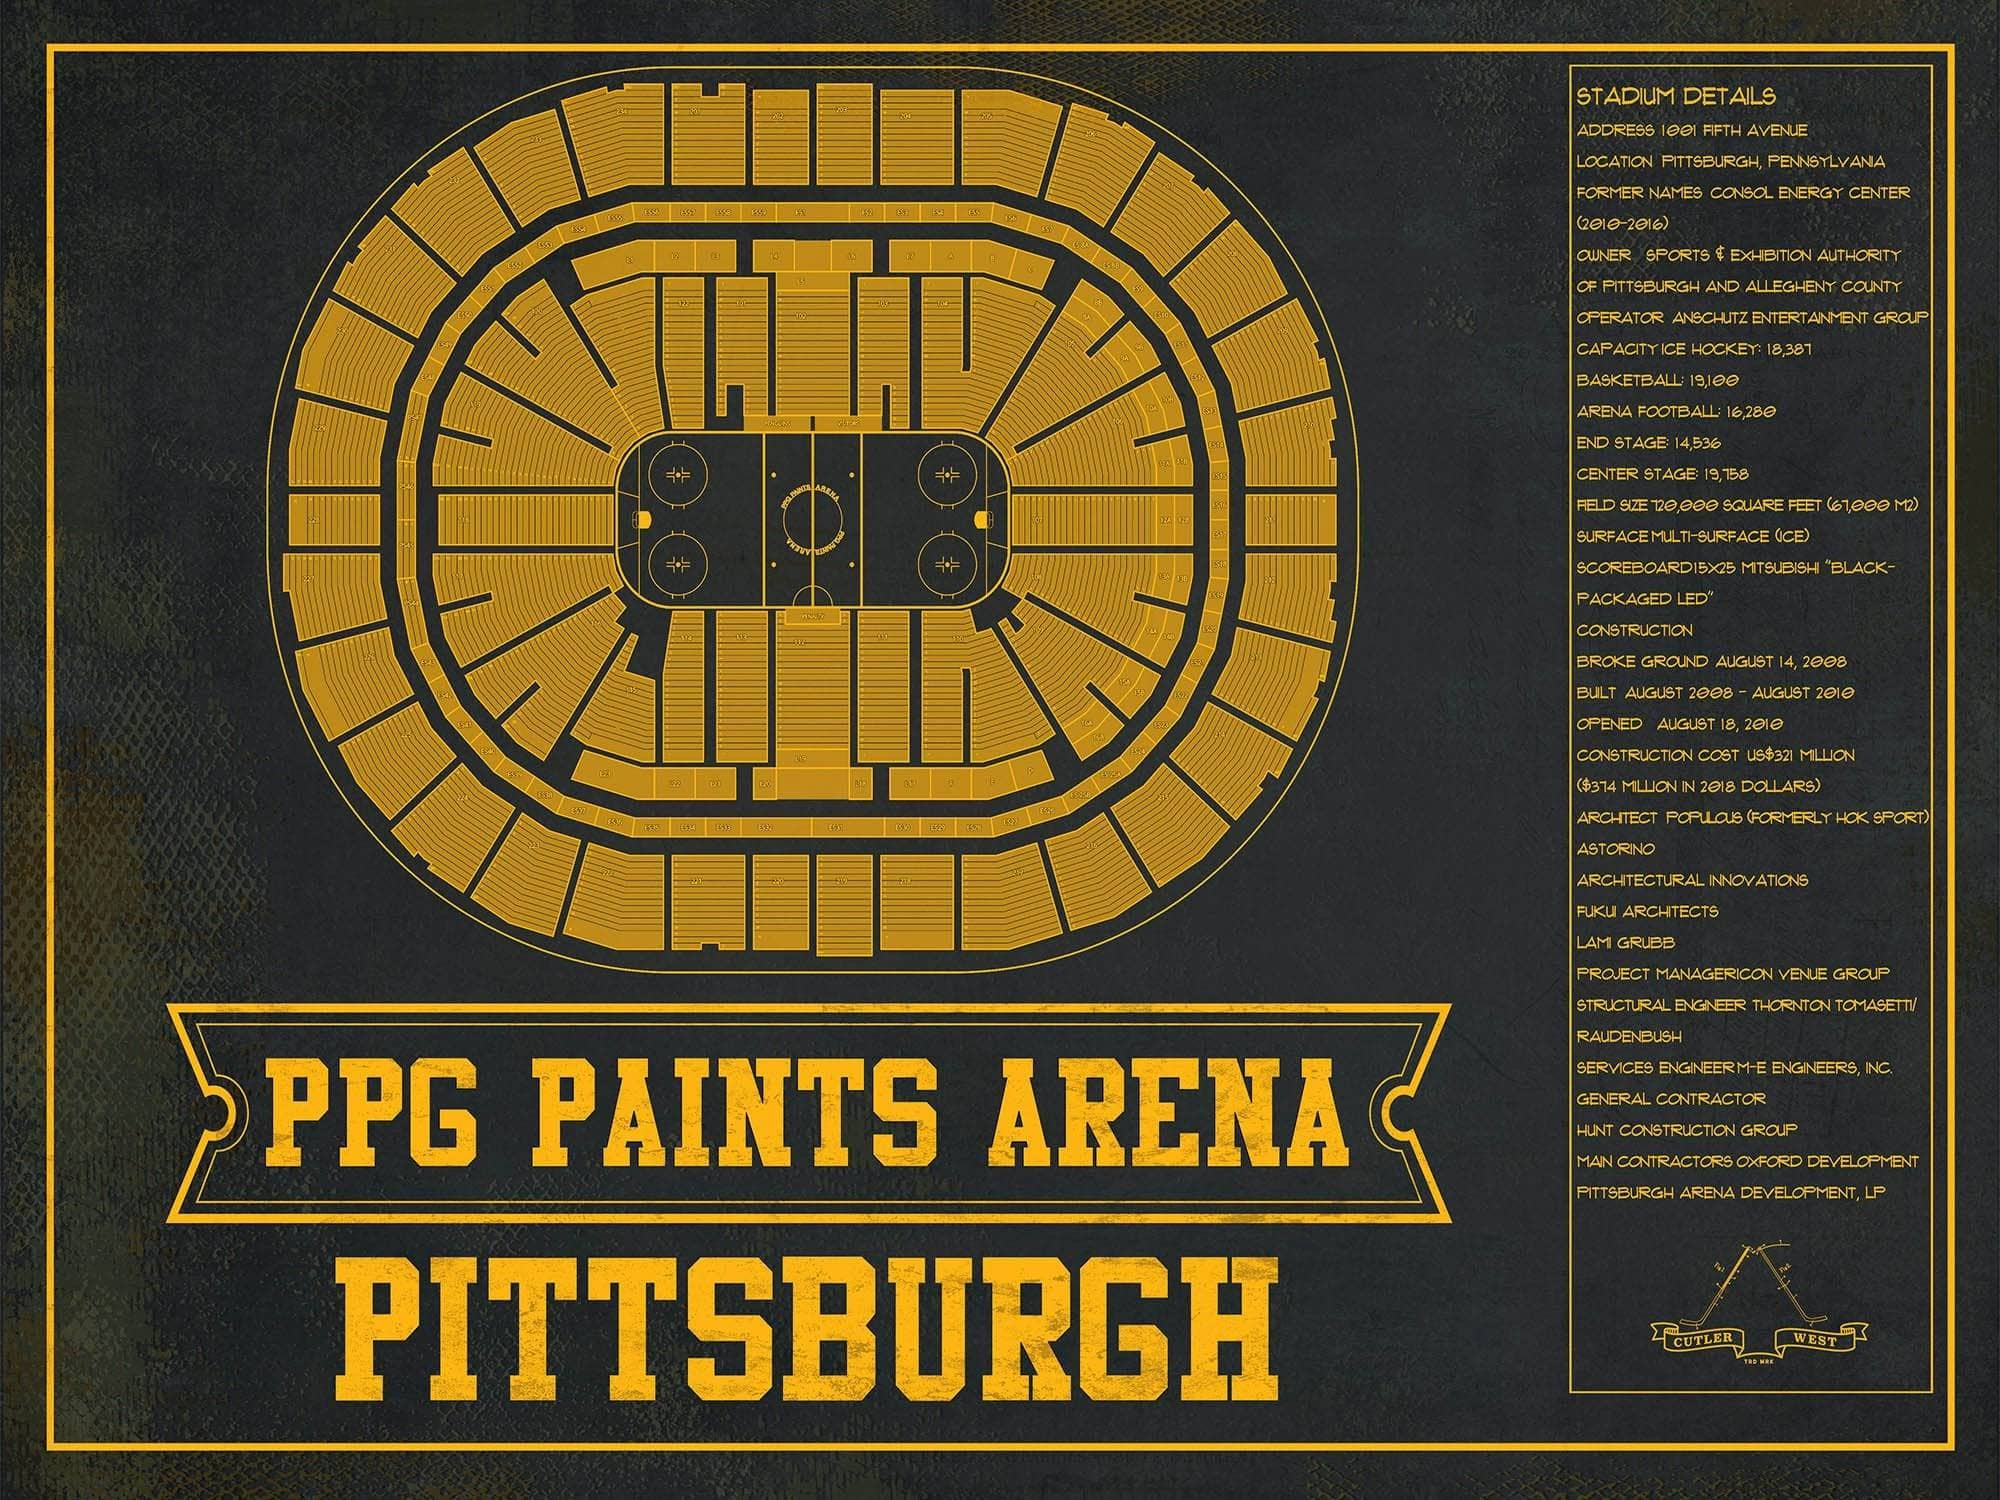 Pittsburgh Penguins Ppg Paints Arena